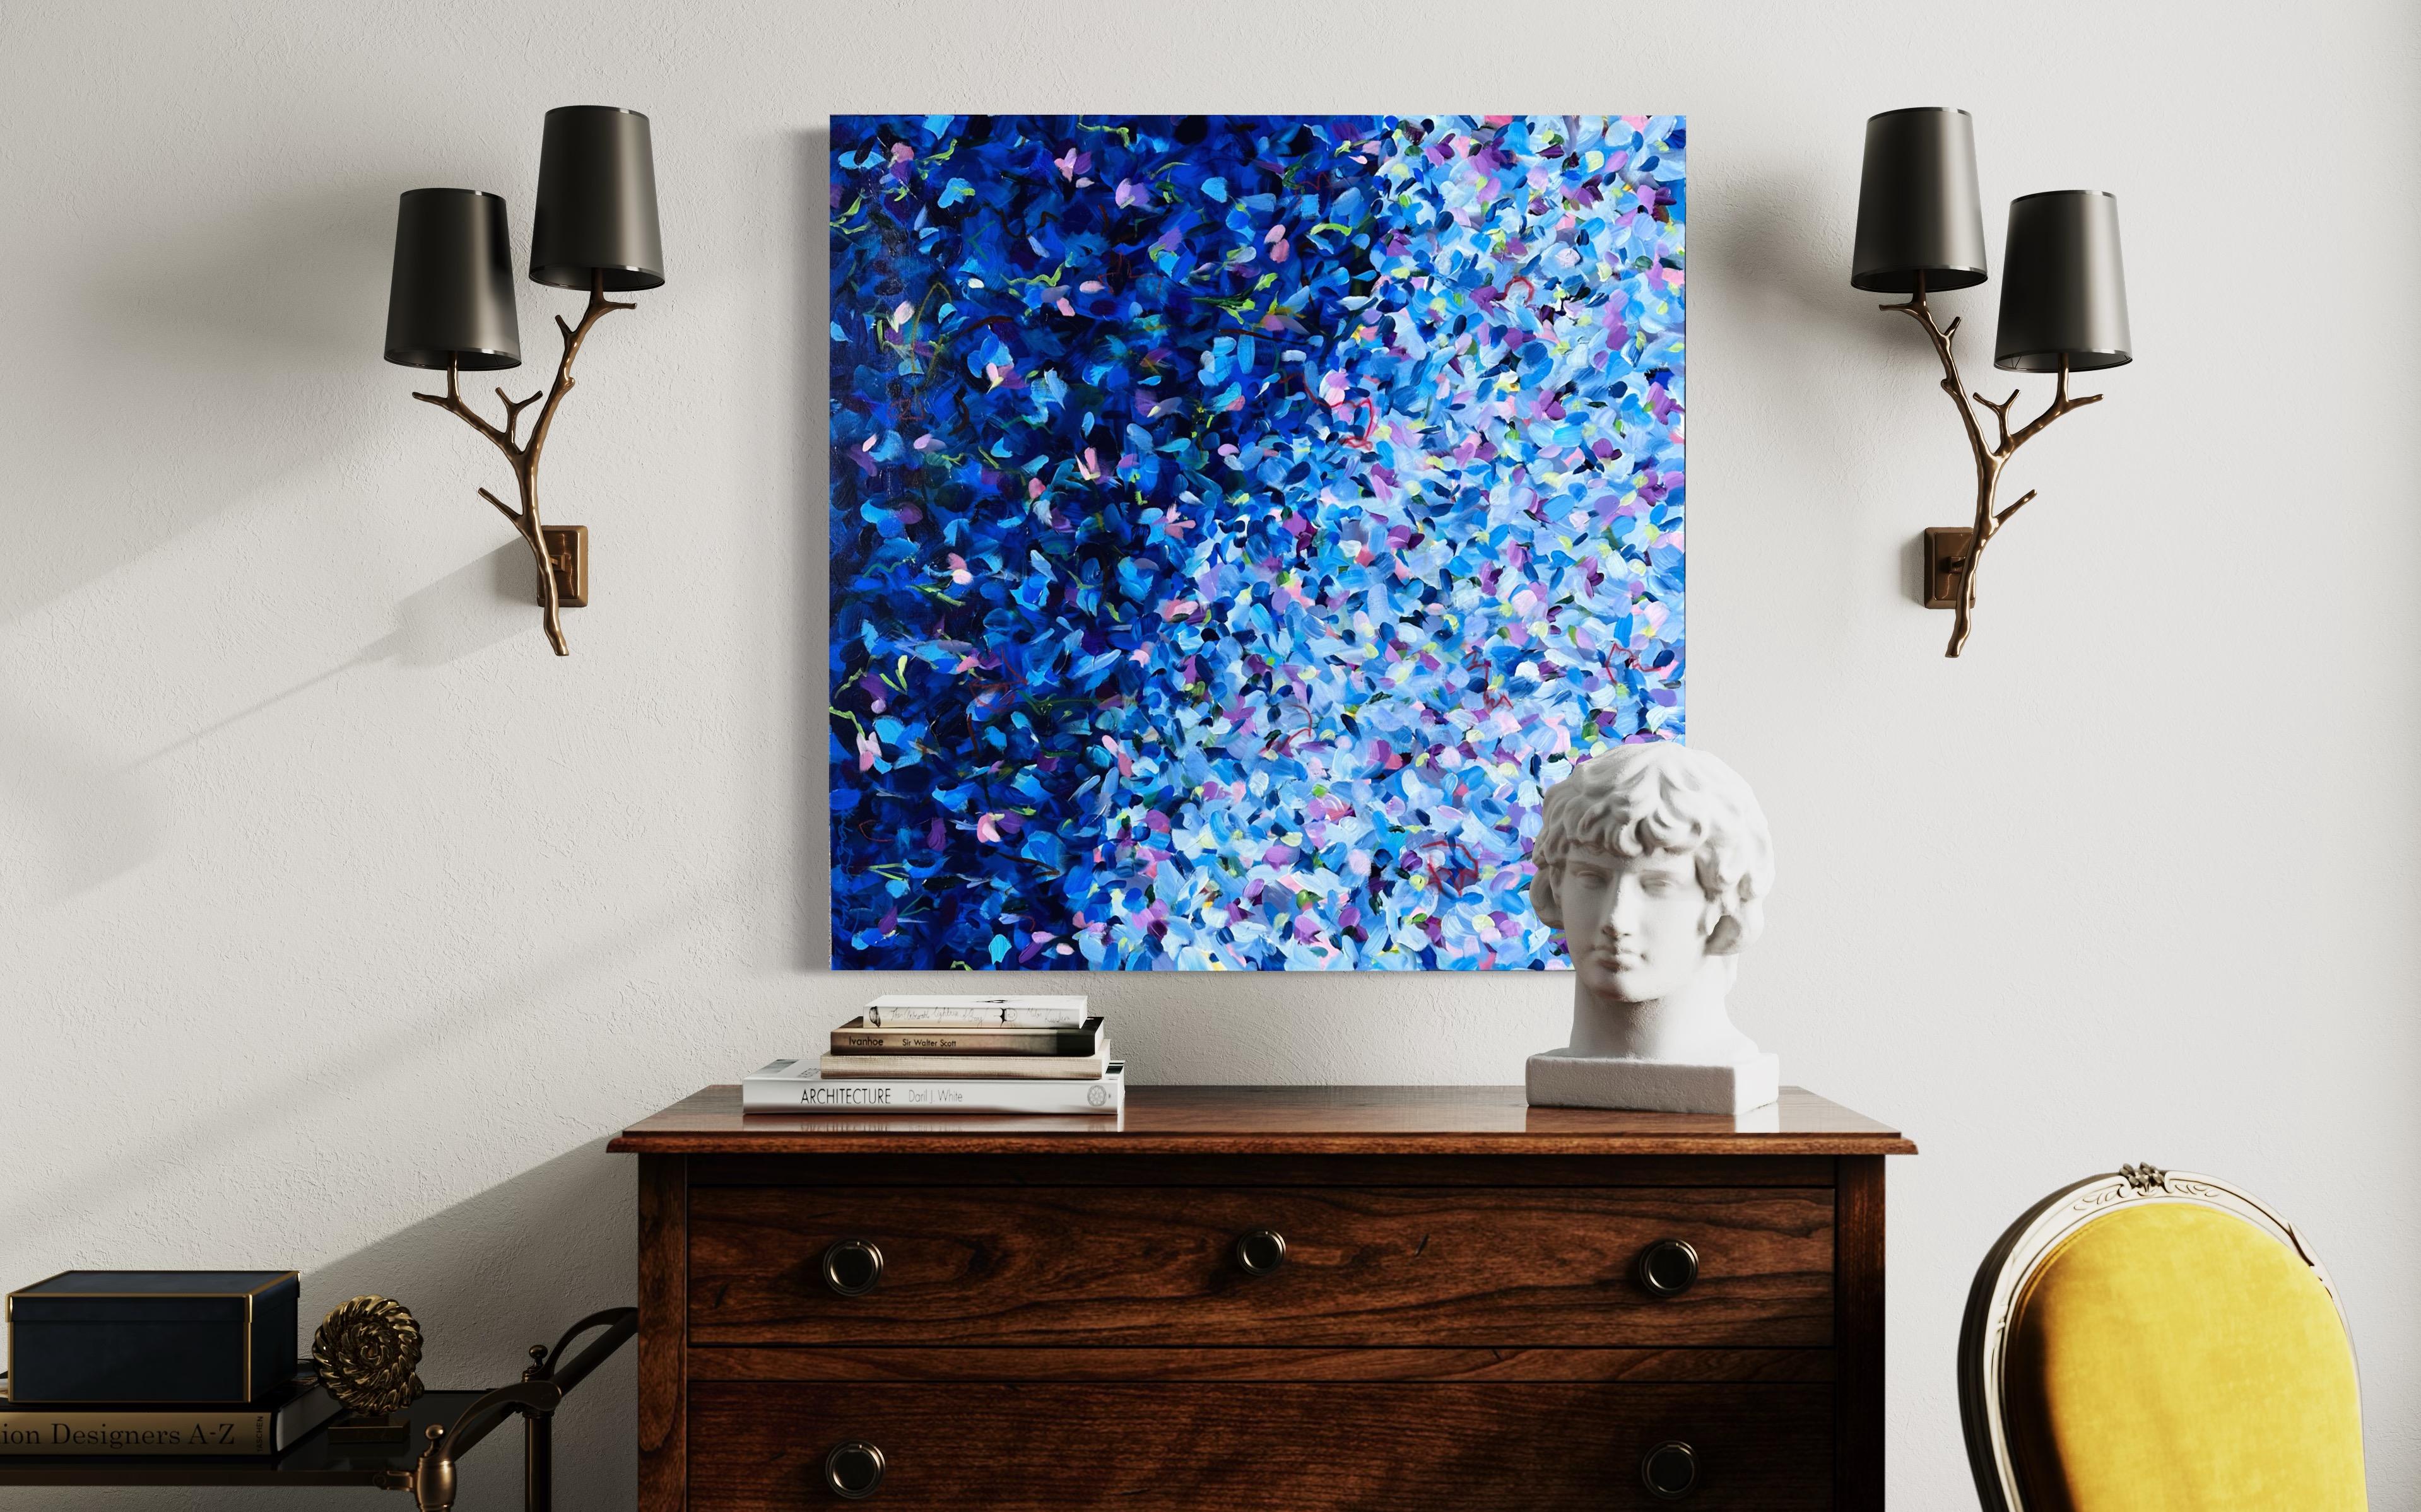 Kimberly Marney
Twinkle (Blue, Abstract, White, Pink, Lilac, Floral, Landscape)
2023
Acrylic on Canvas
Size: 36x36x1.5in
Signed by hand
COA provided
Ref.: 924802-2002

Tags: Blue, Abstract, White, Pink, Lilac, Floral, Landscape

Abstracted